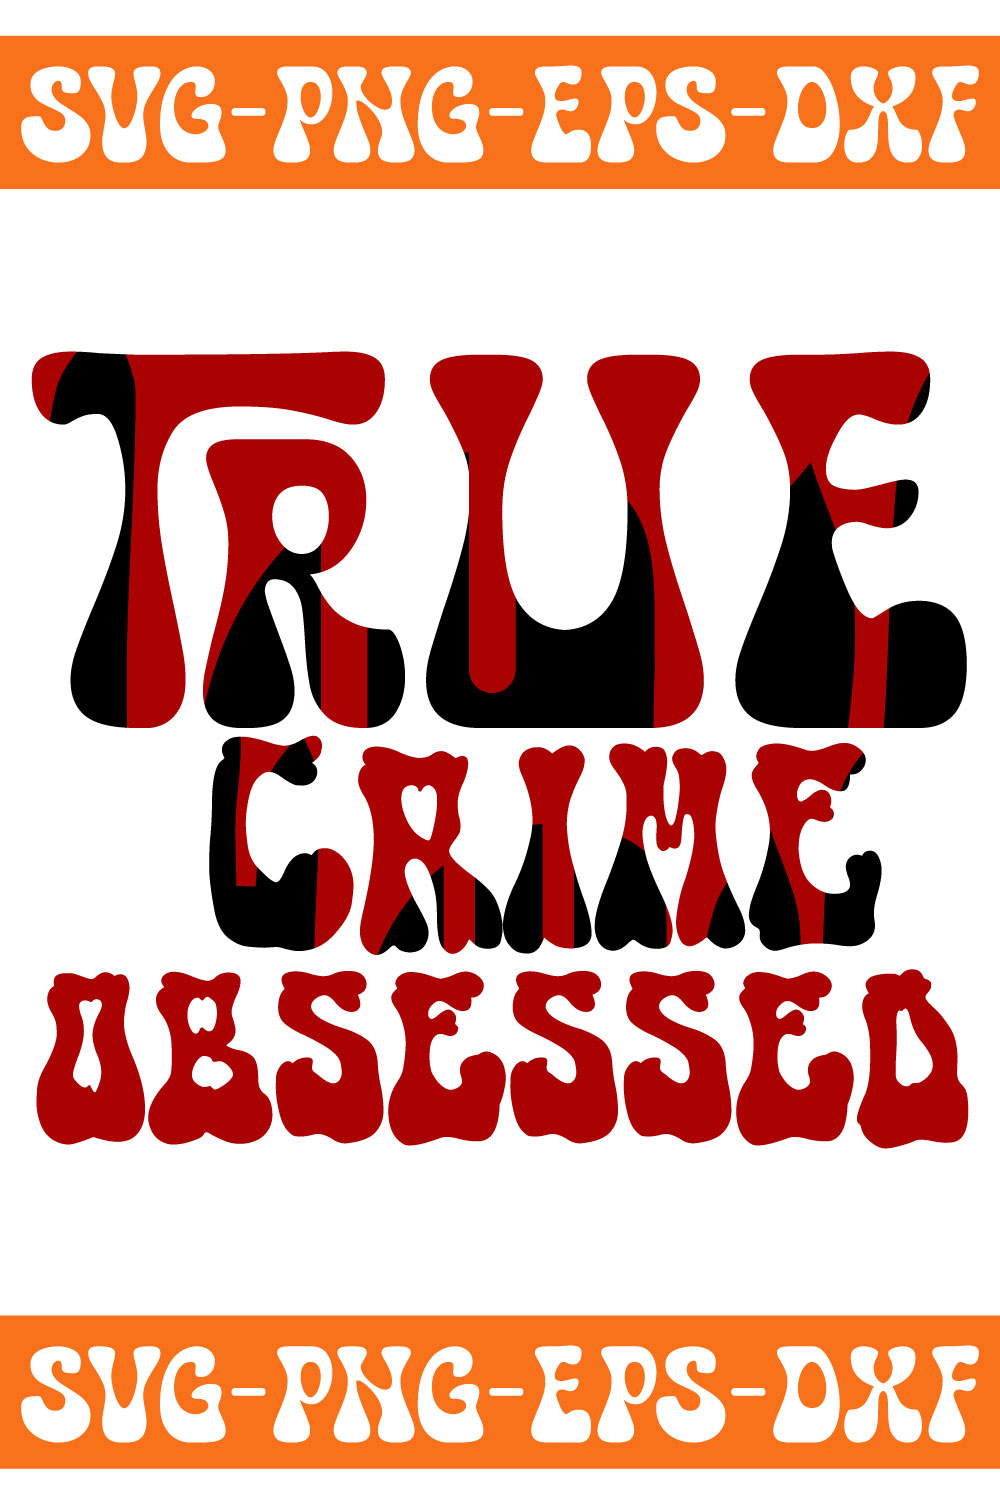 Red and black sign that says true crime exposed.